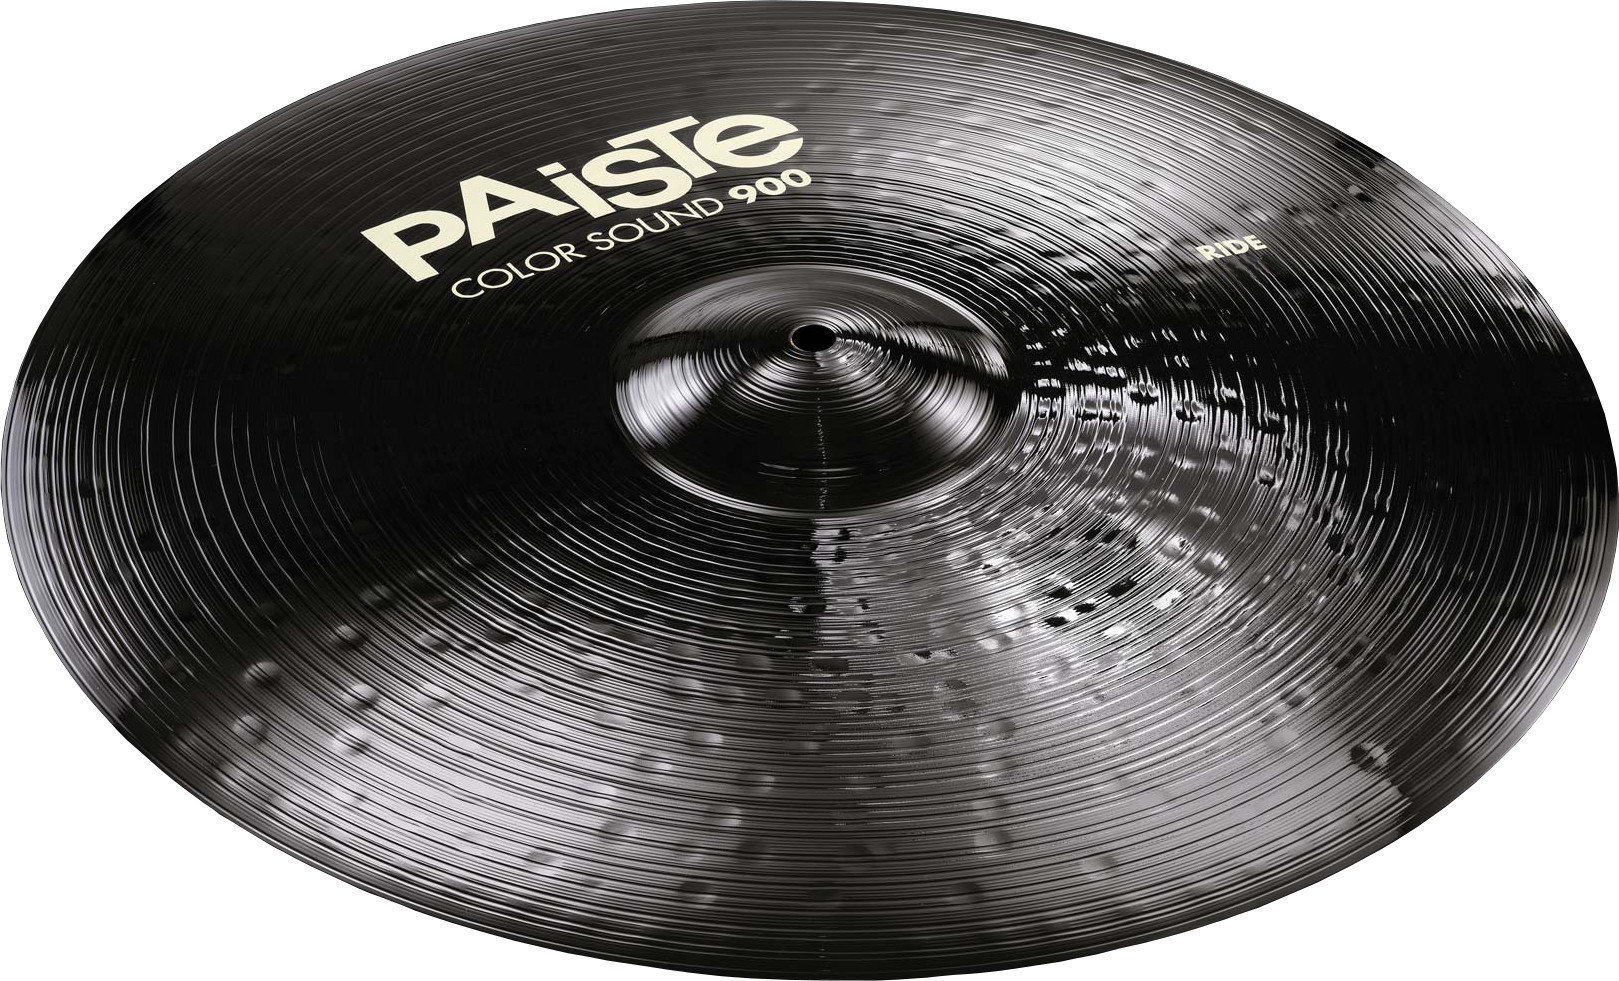 Ride Cymbal Paiste Color Sound 900 Ride Cymbal 22" Black